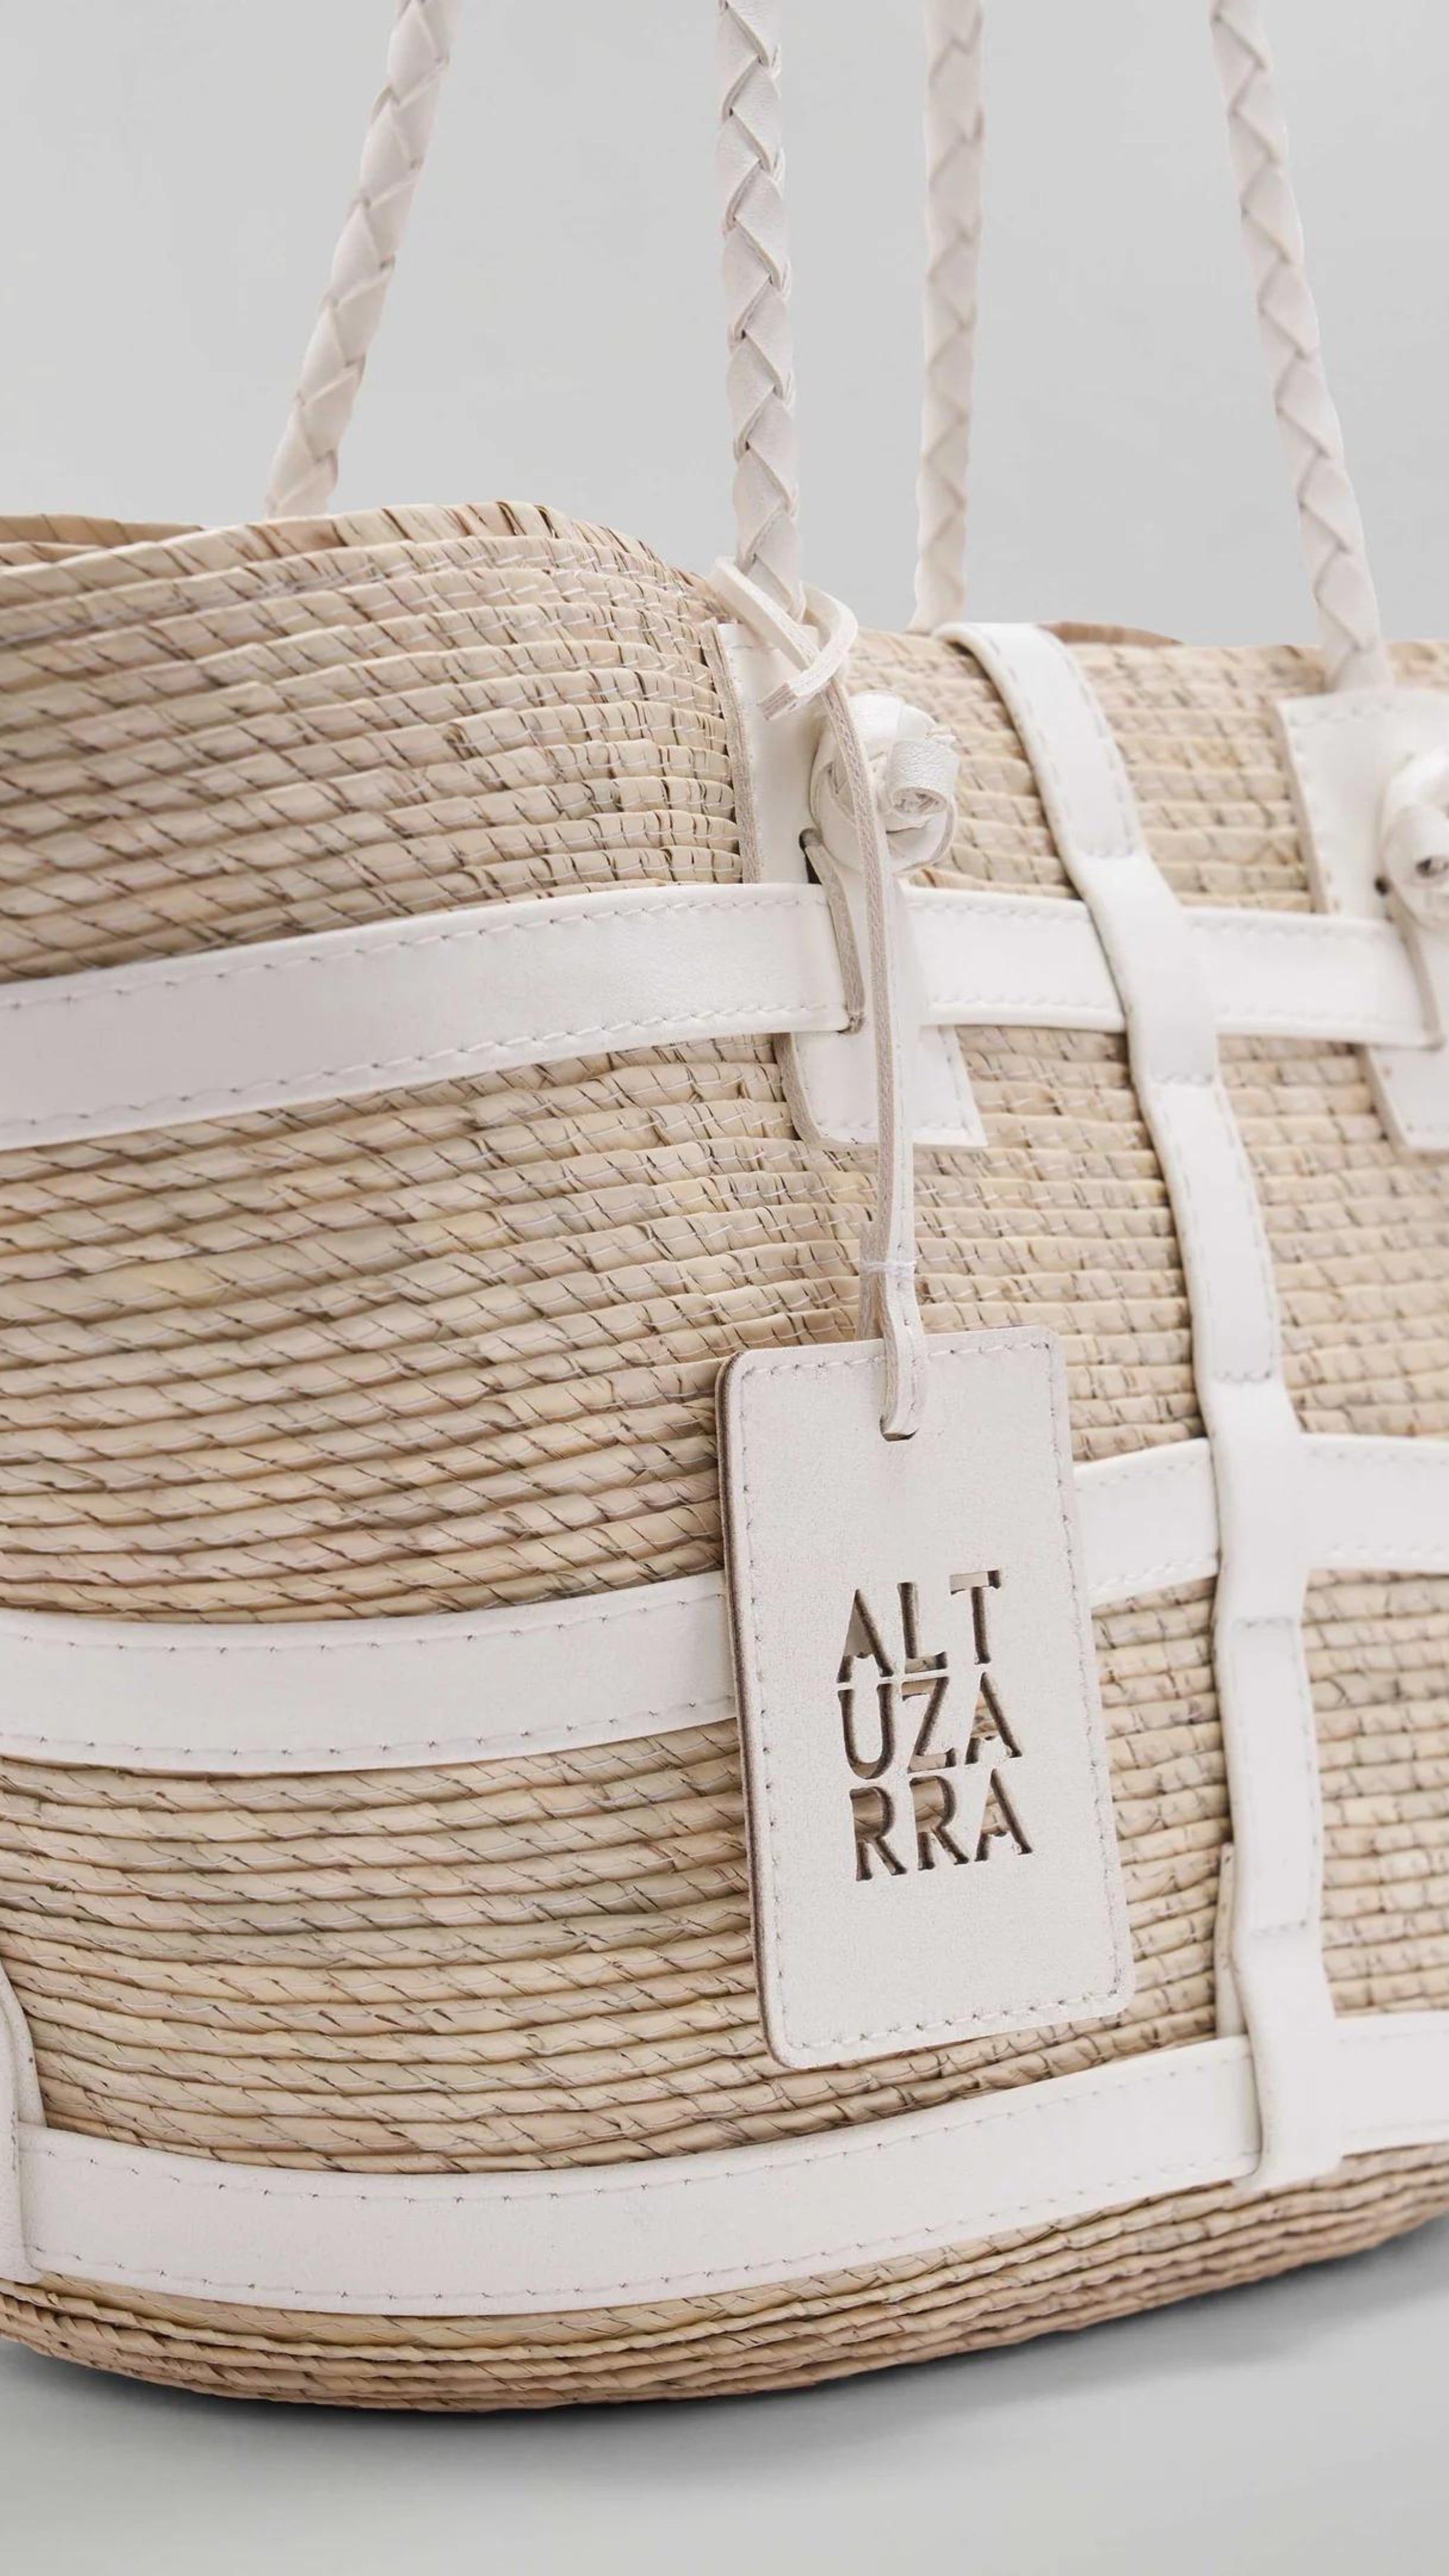 Altuzara Watermill Bag Small in White. Crafted in Mexico from natural palm fibers and detailed with soft white leather. The hand straps are braided leather and it comes with a laser cut detailed Altuzarra hang tag. This photo shows a close up of the details.